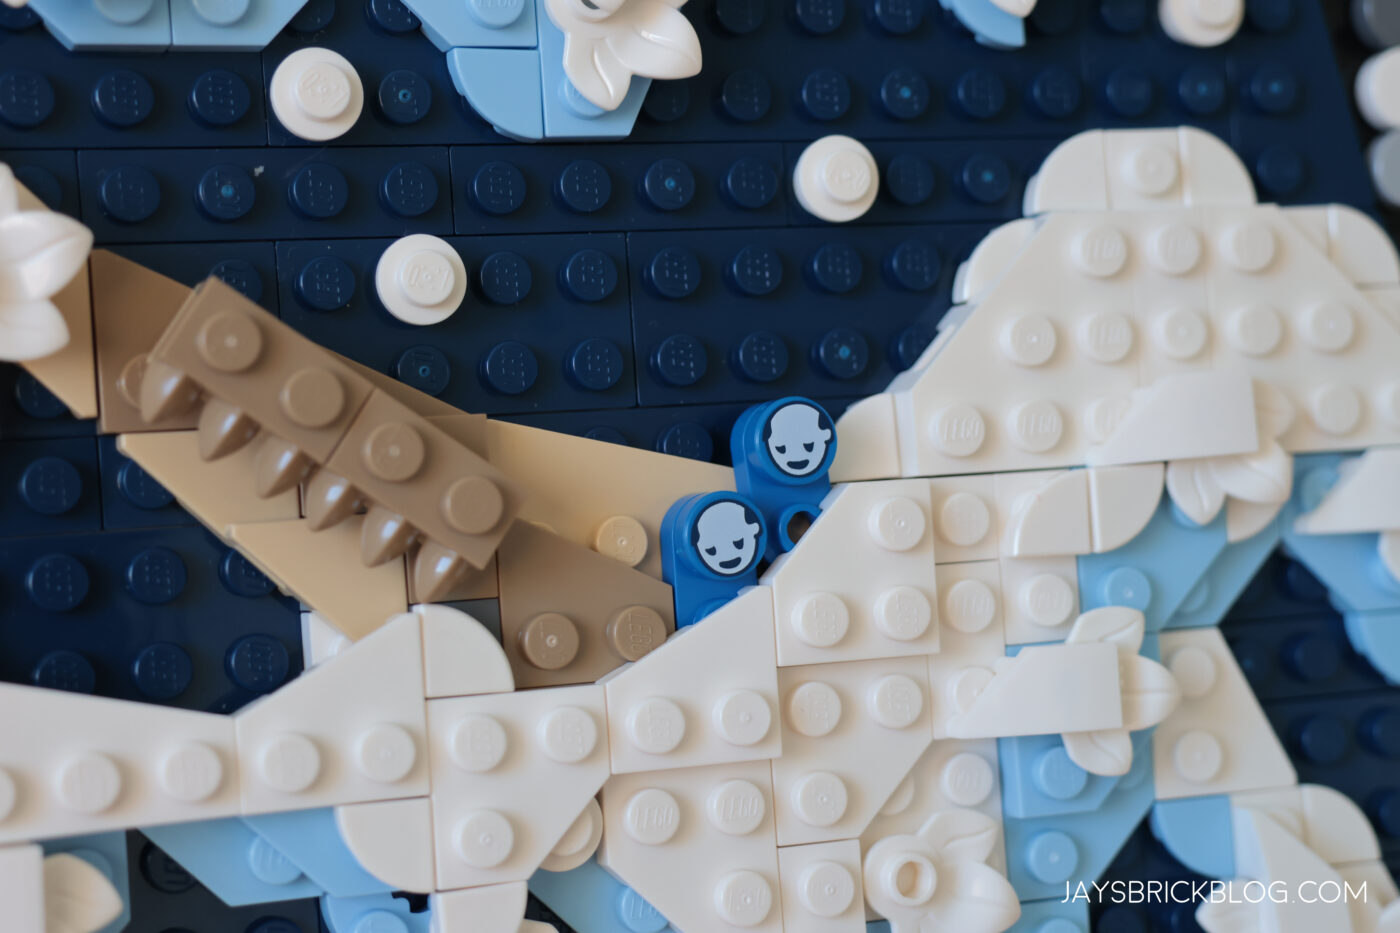 LEGO Art 31208 Hokusai: The Great Wave review and gallery